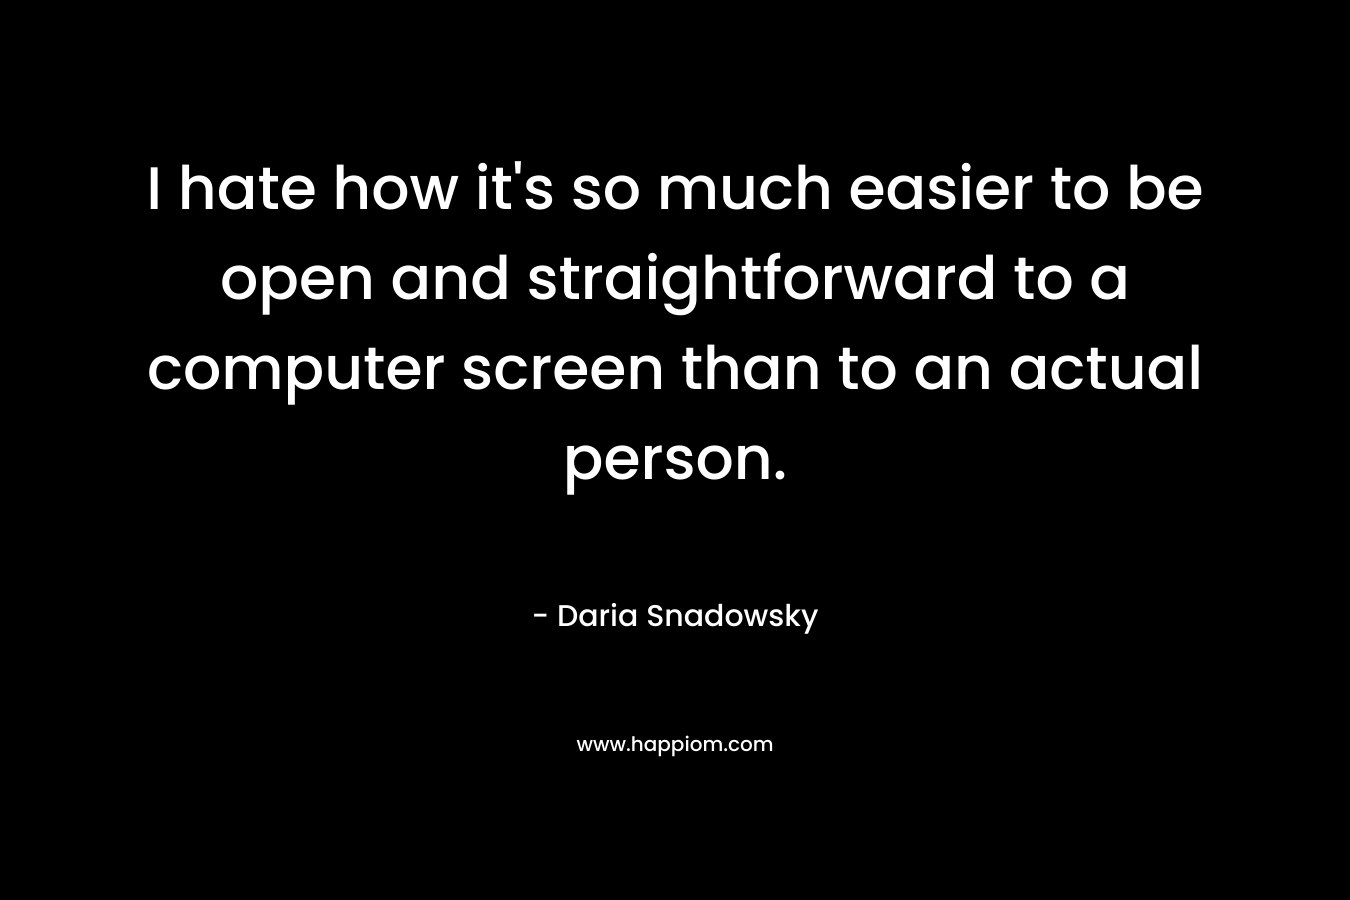 I hate how it’s so much easier to be open and straightforward to a computer screen than to an actual person. – Daria Snadowsky